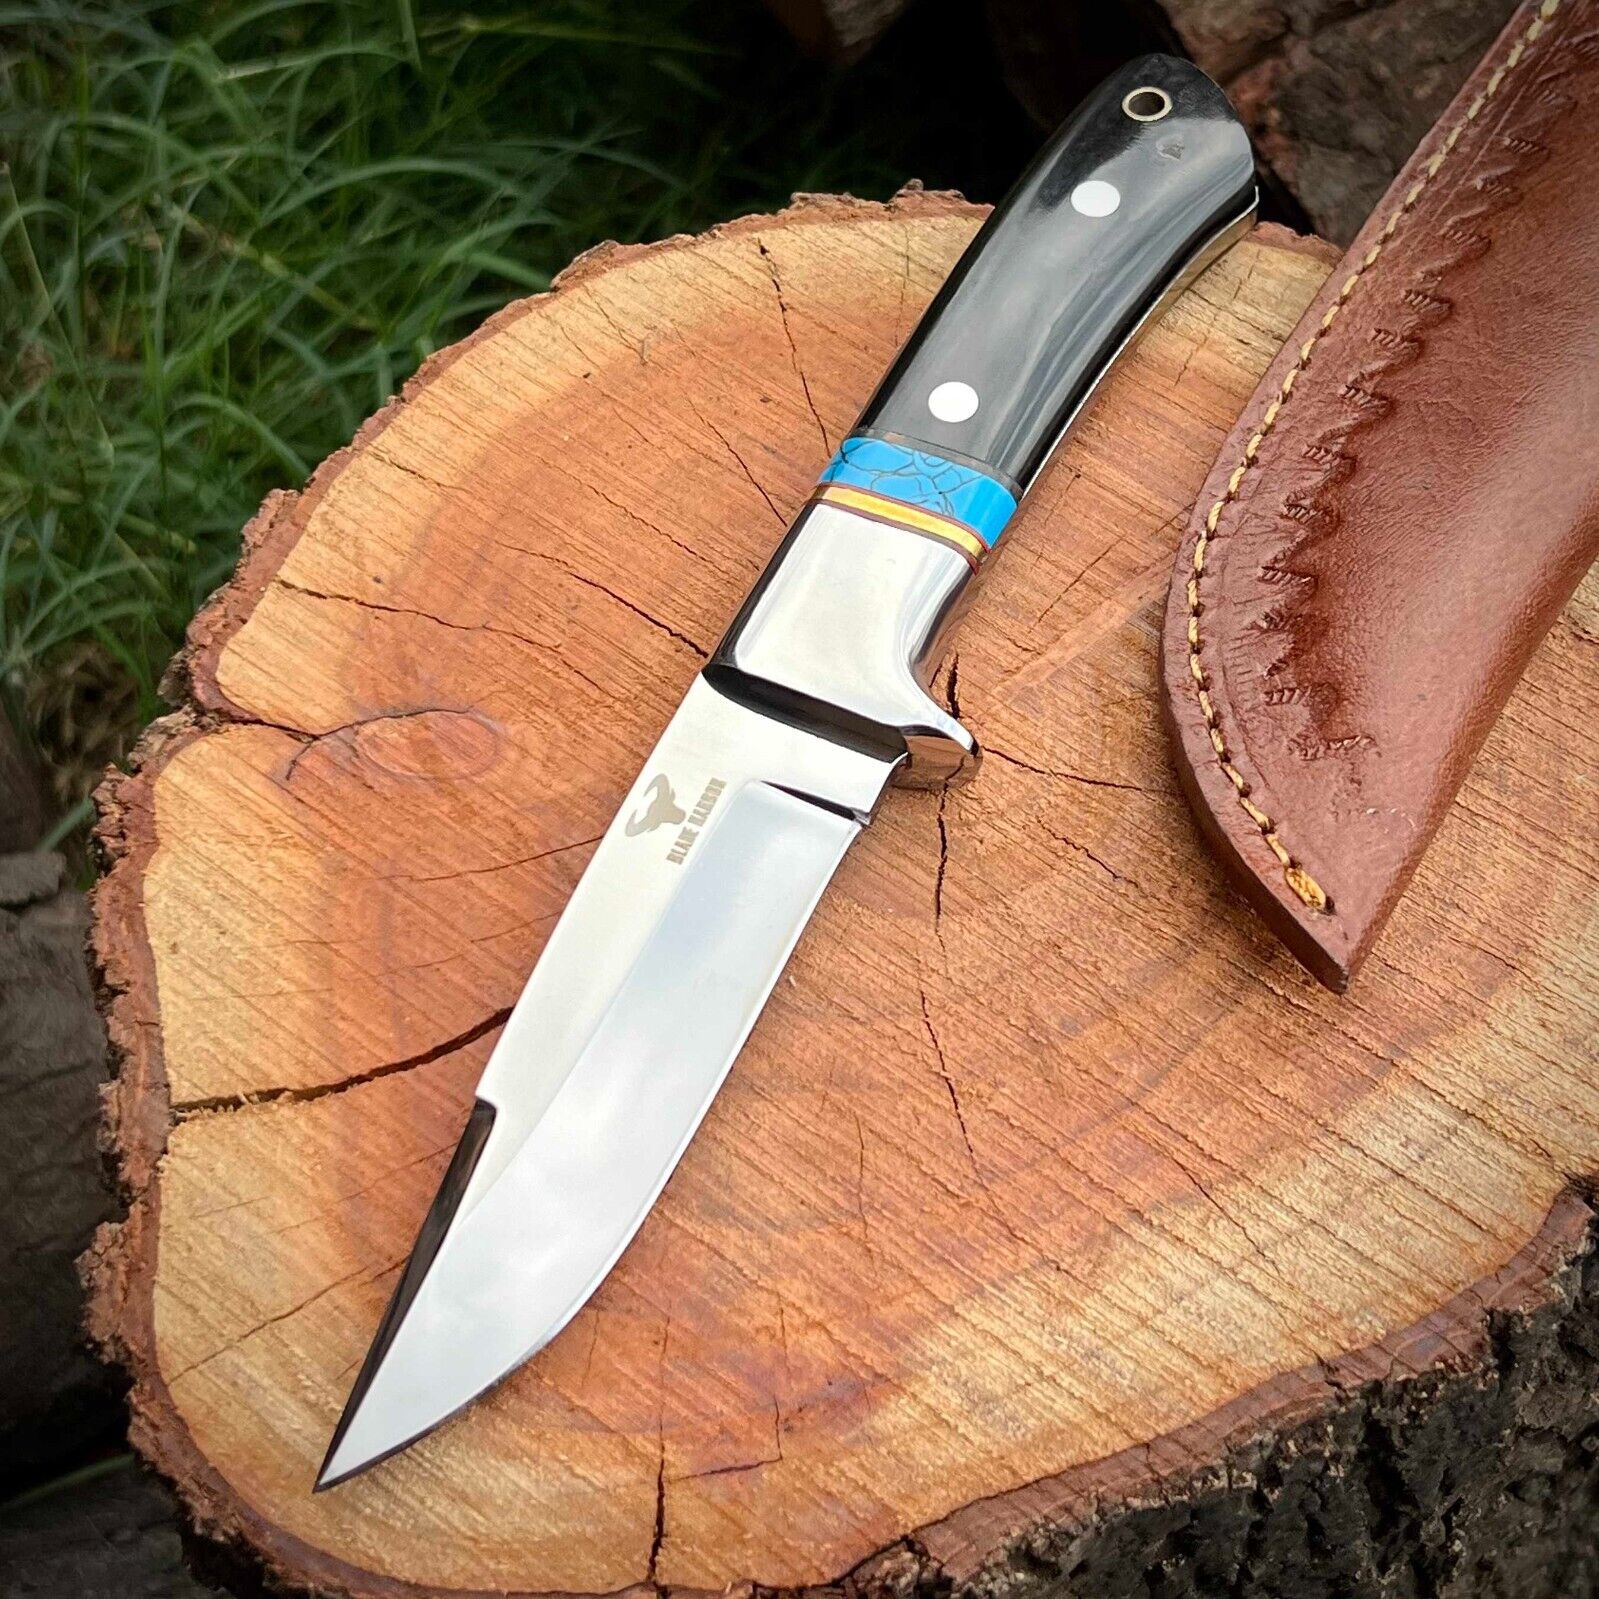 BLADE HARBOR CUSTOM HAND FORGE HUNTING SURVIVAL KNIFE CAMPING POCKET MILITARY